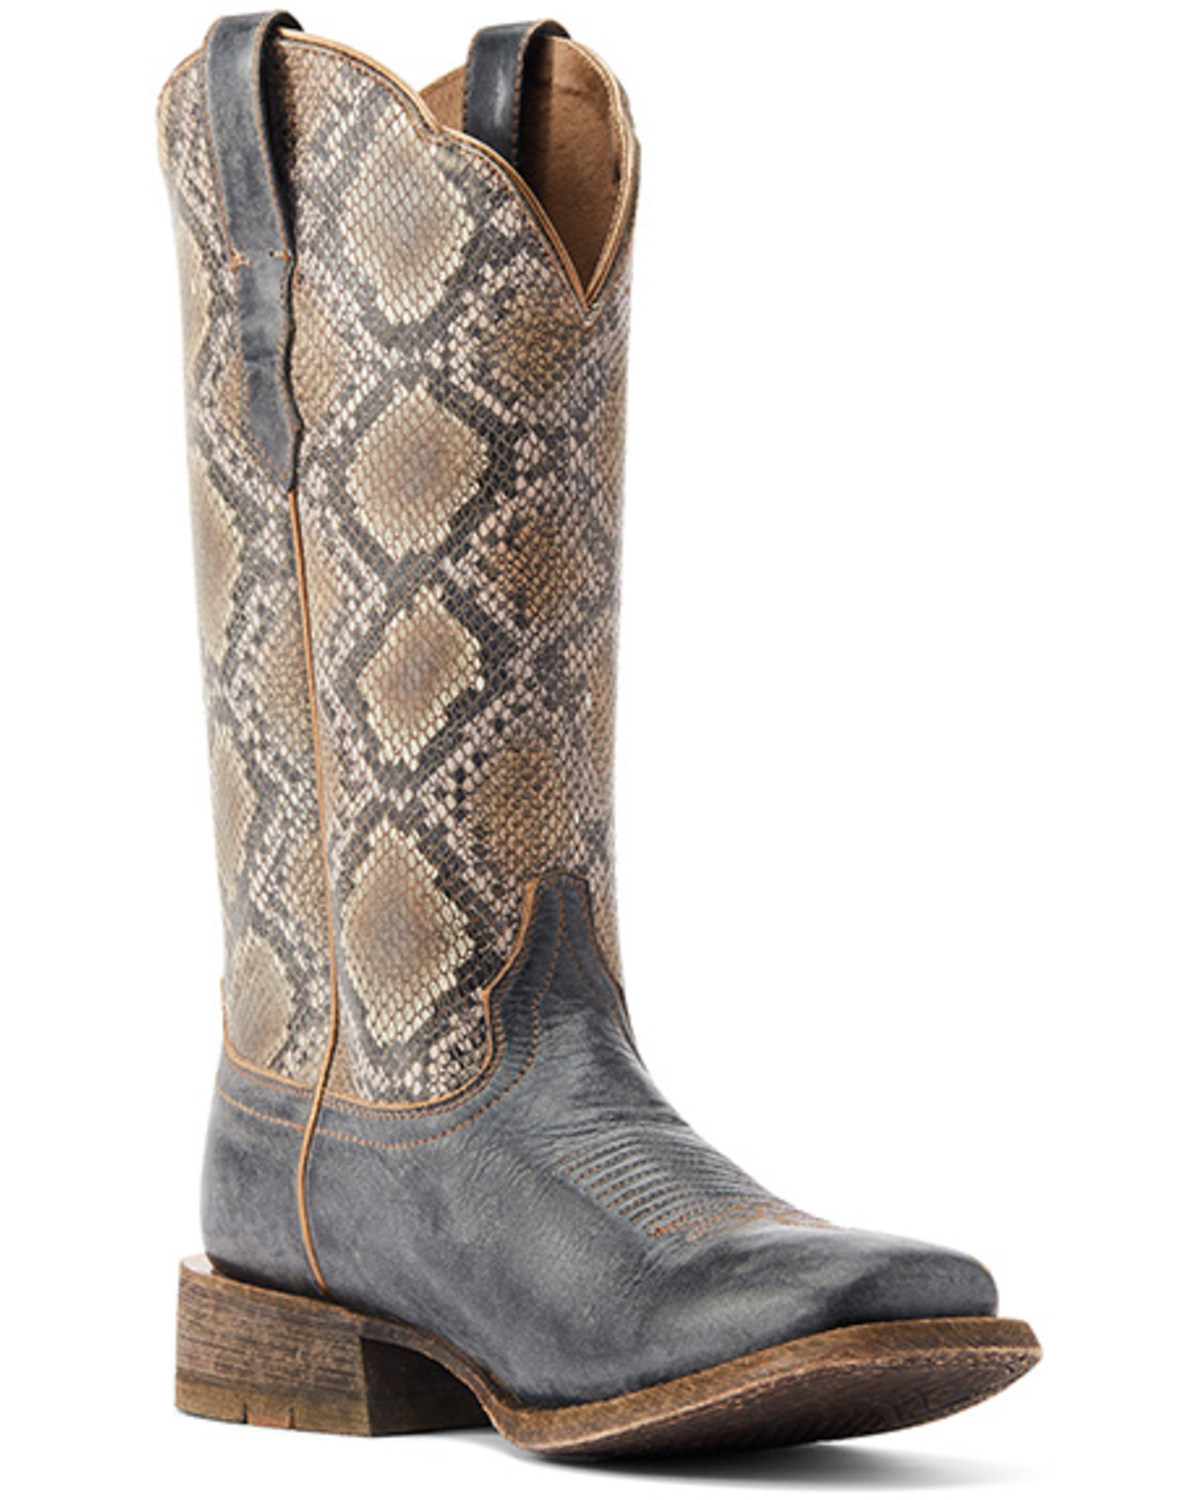 Ariat Women's Frontier Farrah Western Boots - Broad Square Toe